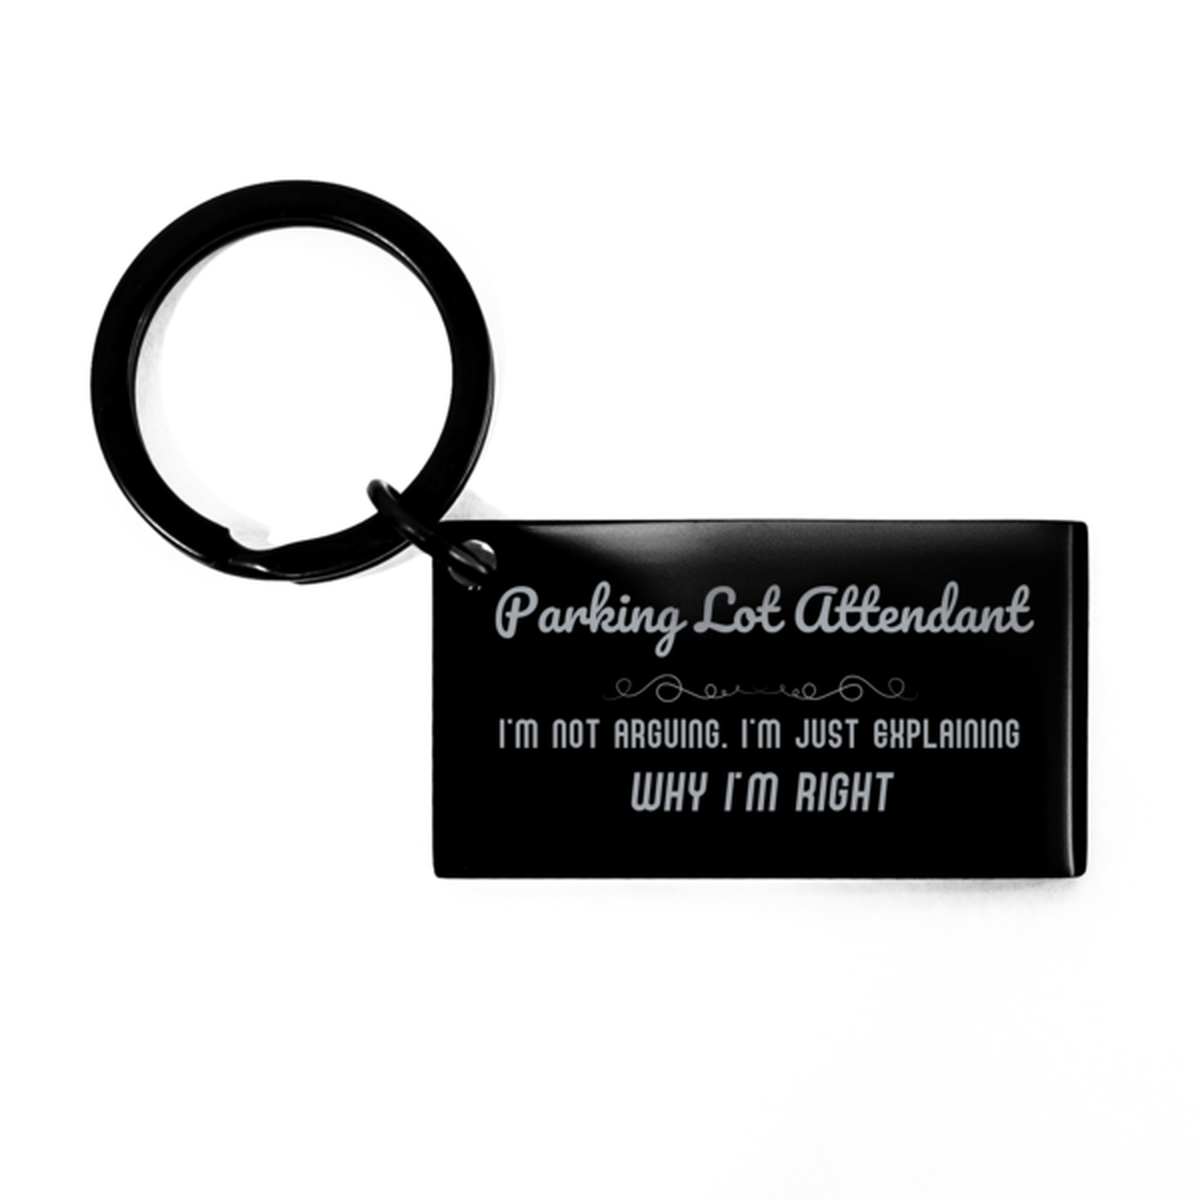 Parking Lot Attendant I'm not Arguing. I'm Just Explaining Why I'm RIGHT Keychain, Funny Saying Quote Parking Lot Attendant Gifts For Parking Lot Attendant Graduation Birthday Christmas Gifts for Men Women Coworker